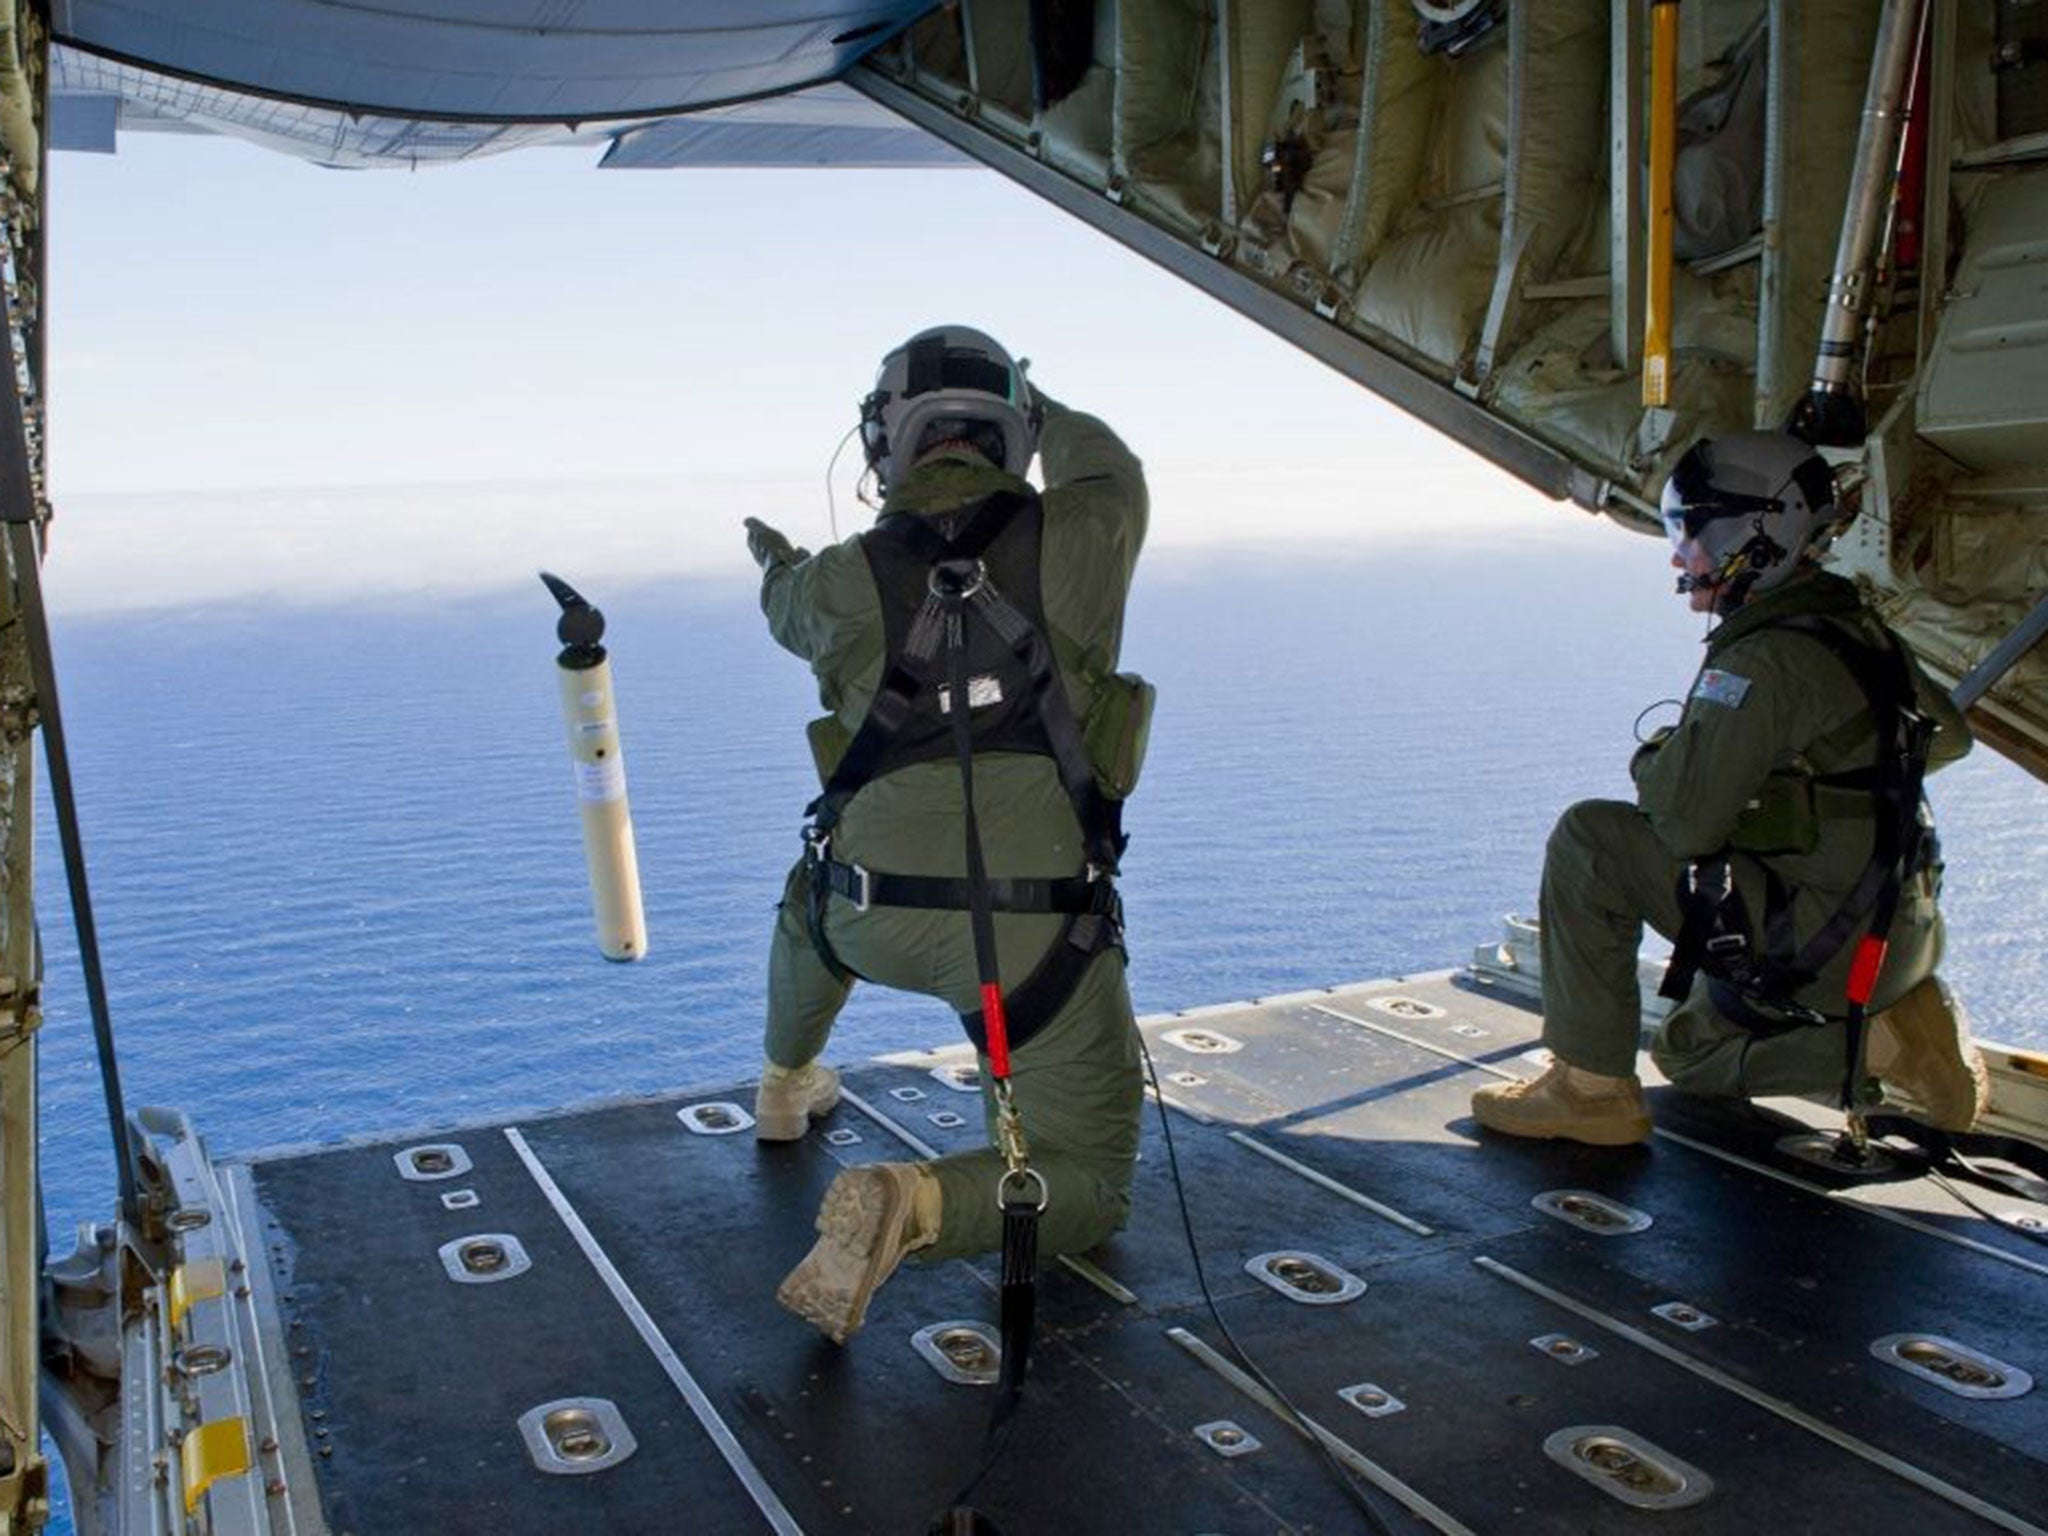 Royal Australian Air Force Loadmasters Sgt. Adam Roberts, left, and Flight Sgt. John Mancey, launch a Self Locating Data Marker Buoy from a C-130J Hercules aircraft in the southern Indian Ocean as part of the Australian Defence Force's assistance to the s